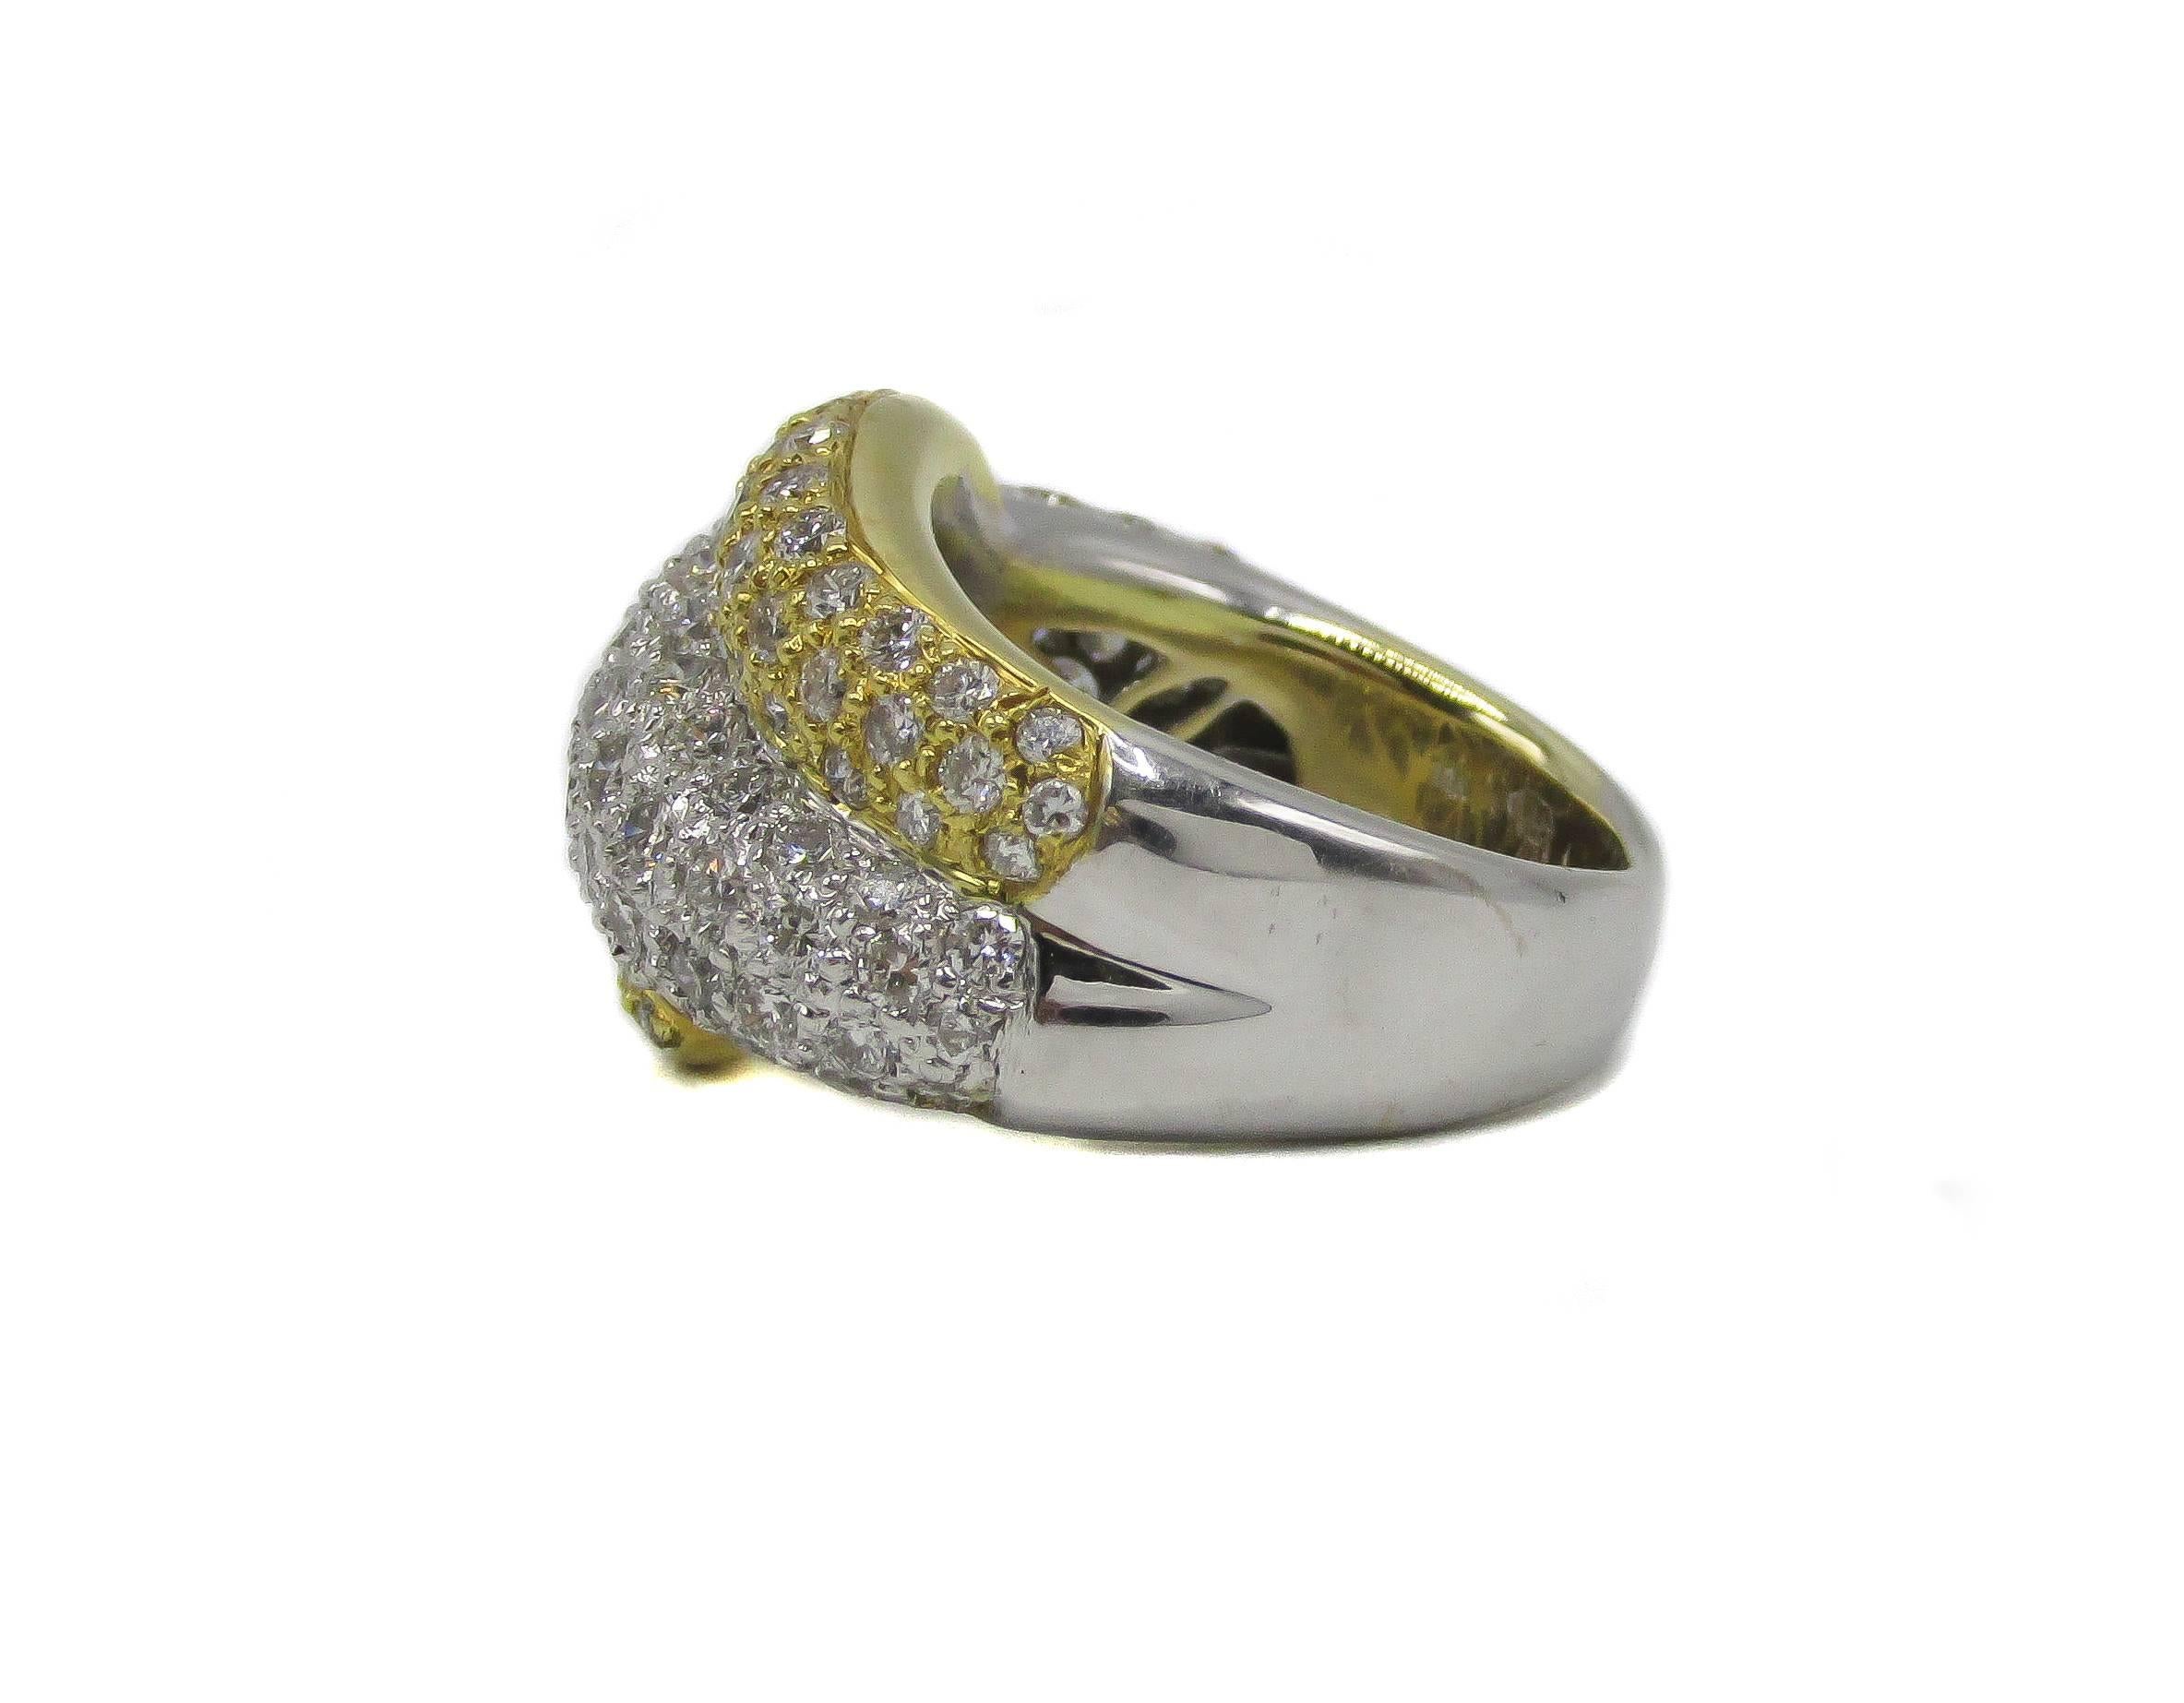 Extremely fashionable and chic 18 karat white and yellow gold diamond ring pave set with bright white and sparkling round brilliant cut diamonds The band is designed of one central white gold section with a yellow gold graduation rounded band coming